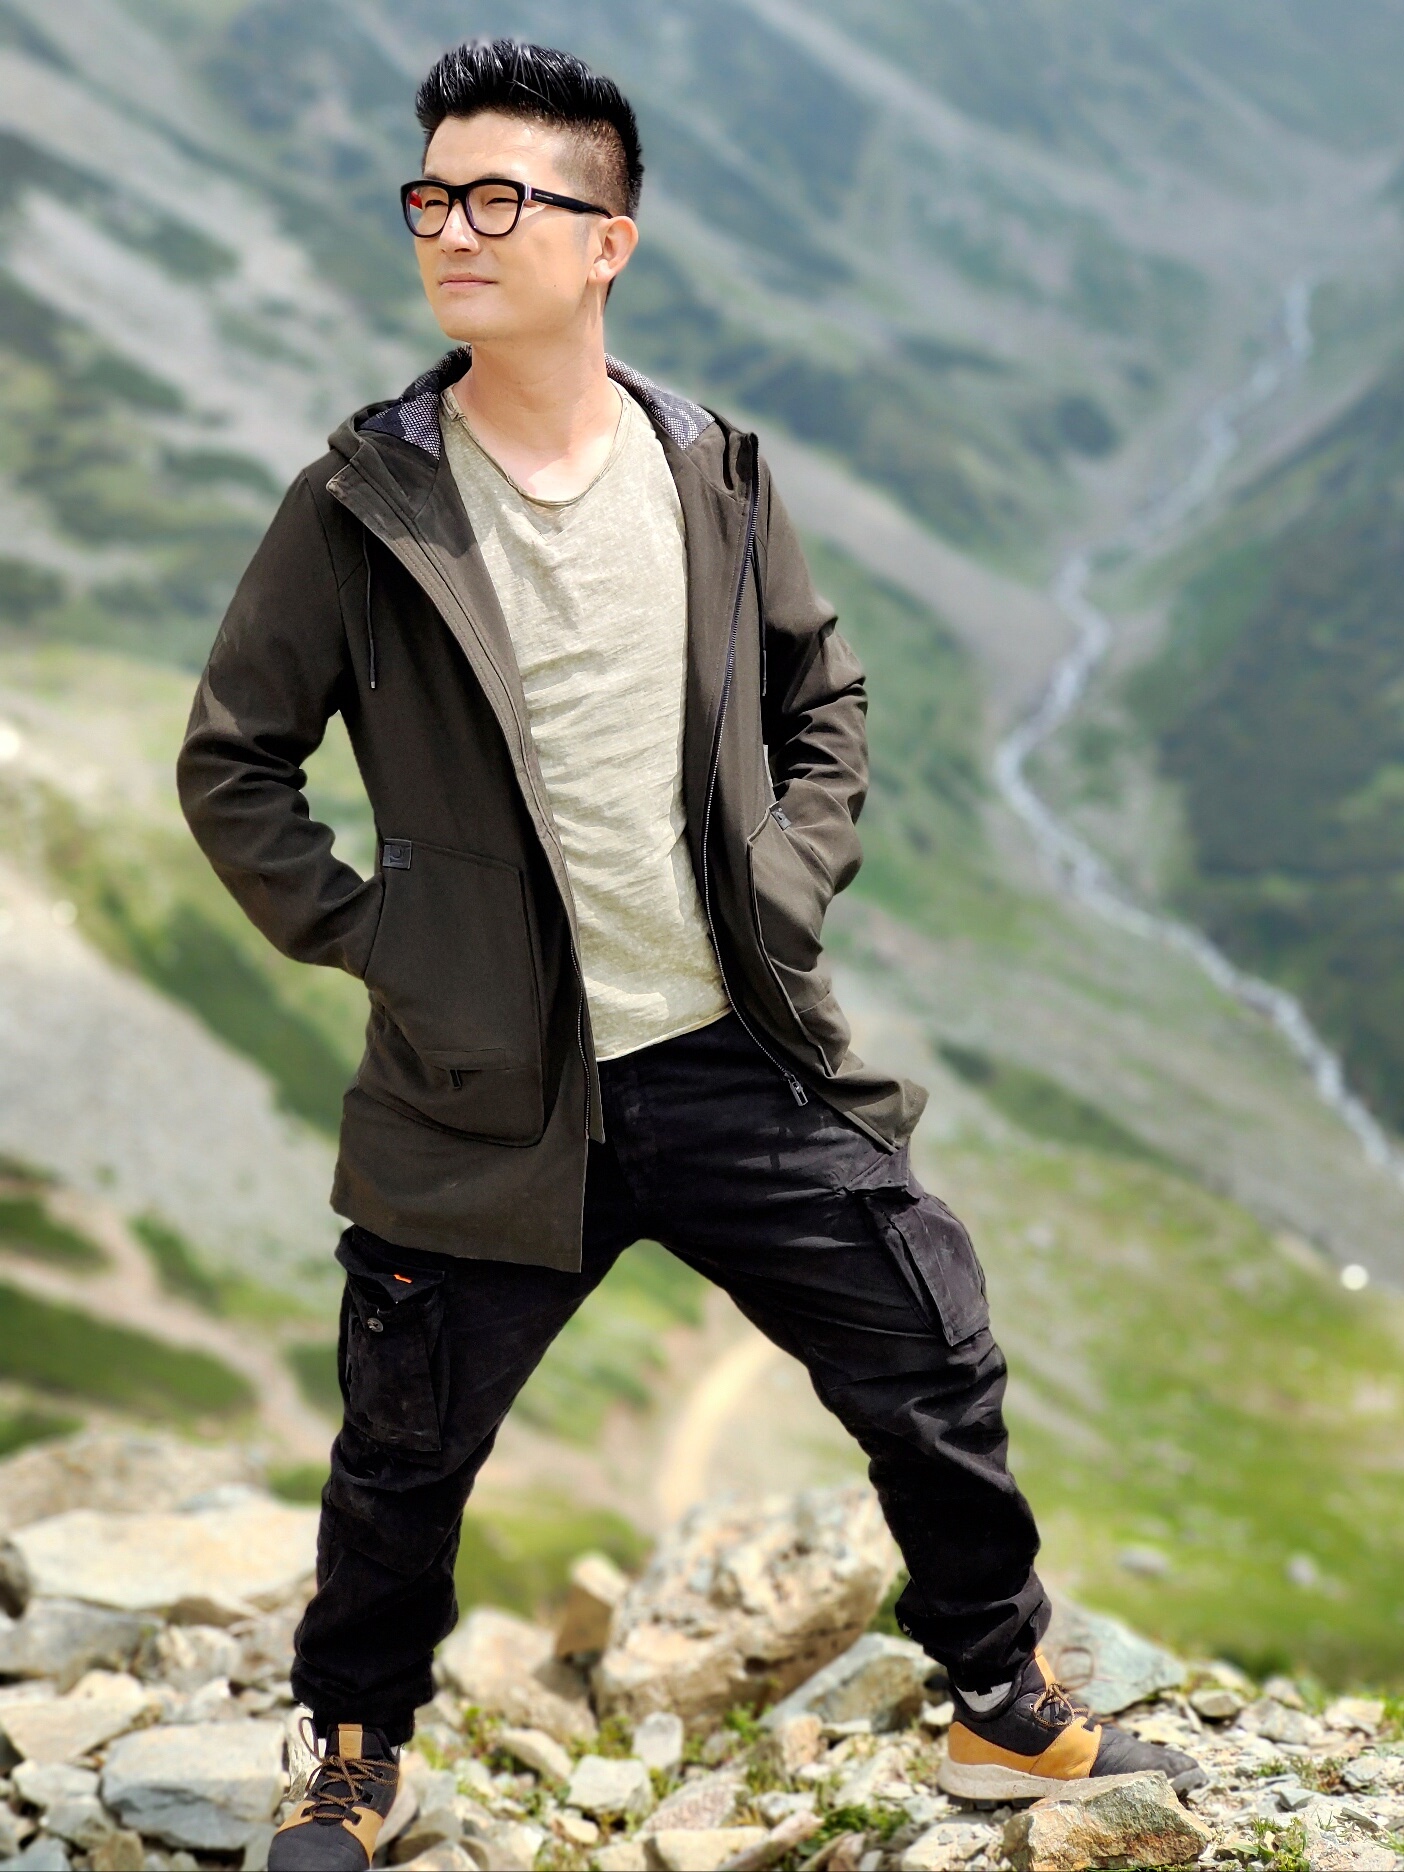 Meiyang Chang - host of ‘Lost Essence of India’ on Discovery Channel -Photo By GPN